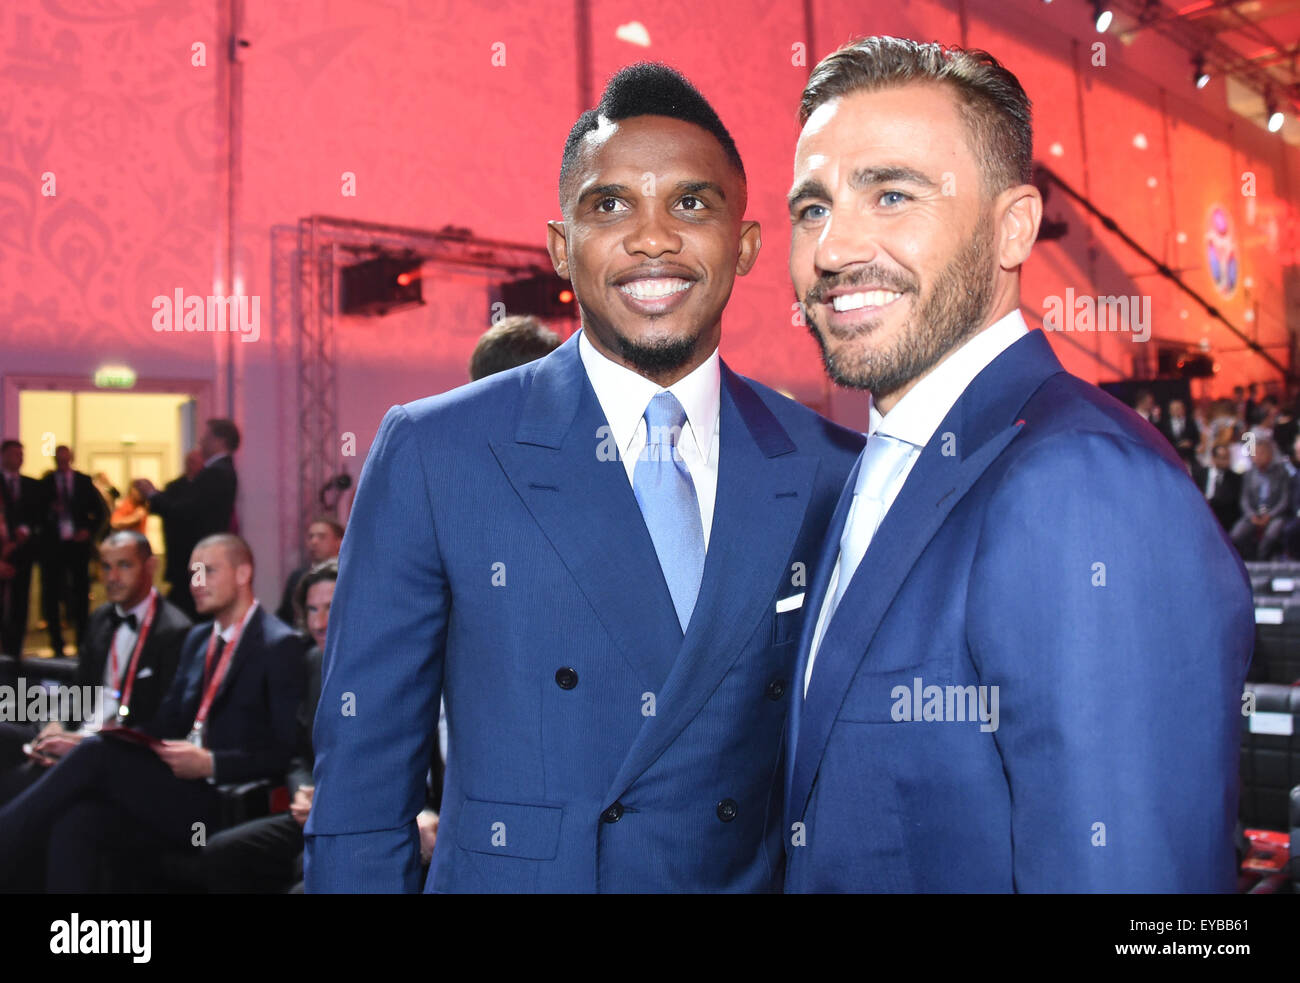 St Petersburg, Russia. 25th July, 2015. Samuel Eto'o (L) of Cameroon and former Italian soccer player Fabio Cannavaro attend the Preliminary Draw of the FIFA World Cup 2018 at Konstantinovsky palace outside St. Petersburg, Russia, 25 July 2015. St. Petersburg is one of the host cities of the FIFA World Cup 2018 in Russia which will take place from 14 June until 15 July 2018. Credit:  dpa picture alliance/Alamy Live News Stock Photo